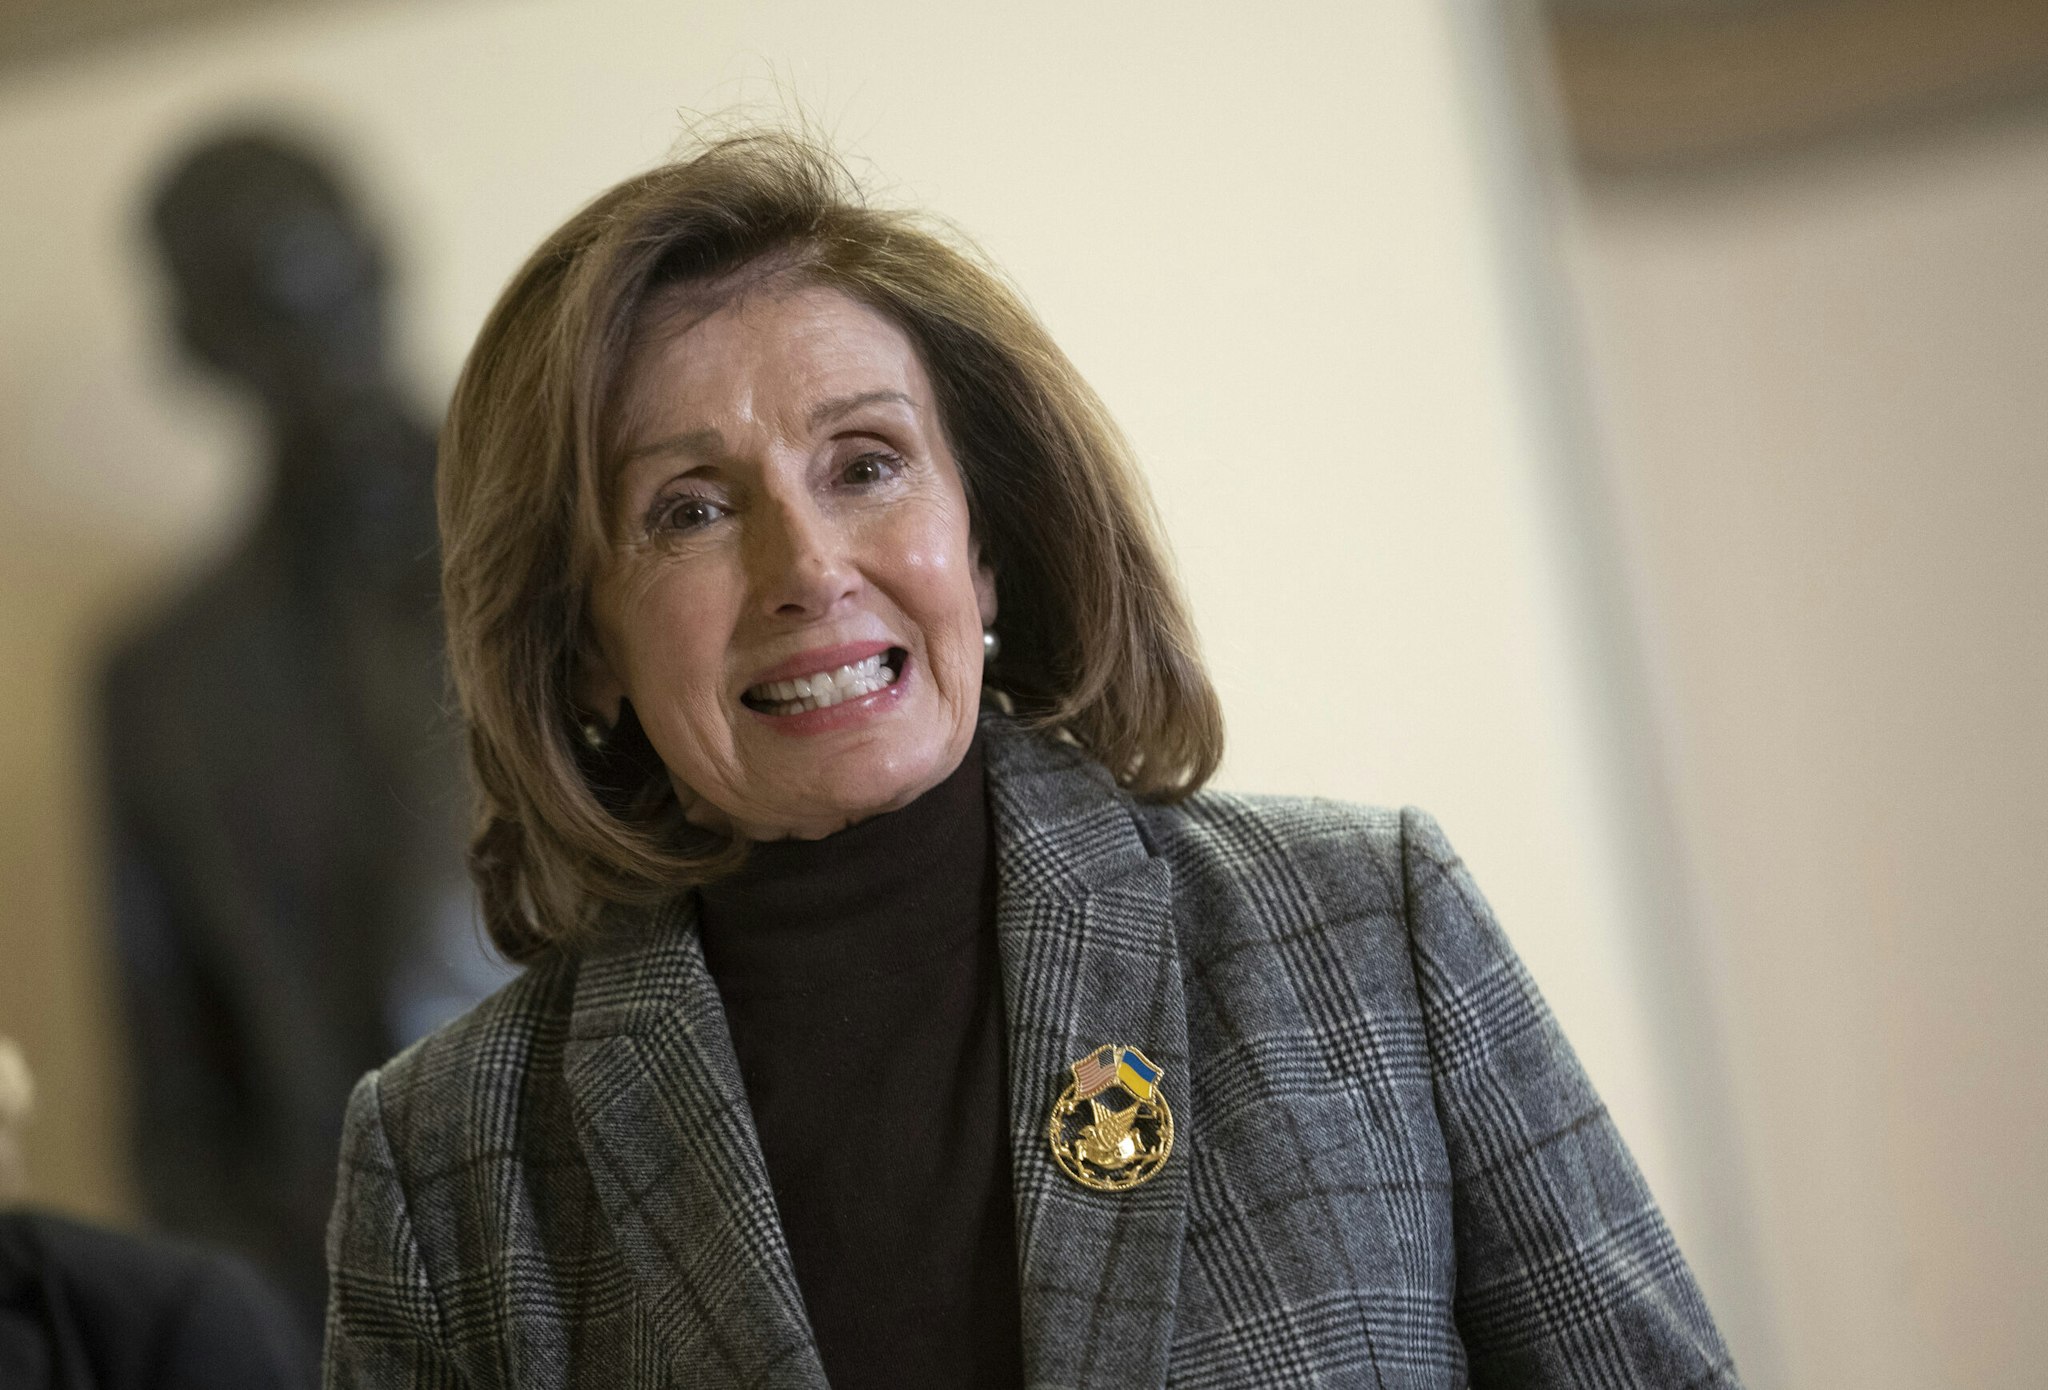 House Speaker Nancy Pelosi drew social media mockery Friday after wishing a “Happy Shwanza,” presumably to those who celebrate Kwanzaa, in her remarks following passage of the omnibus spending bill.